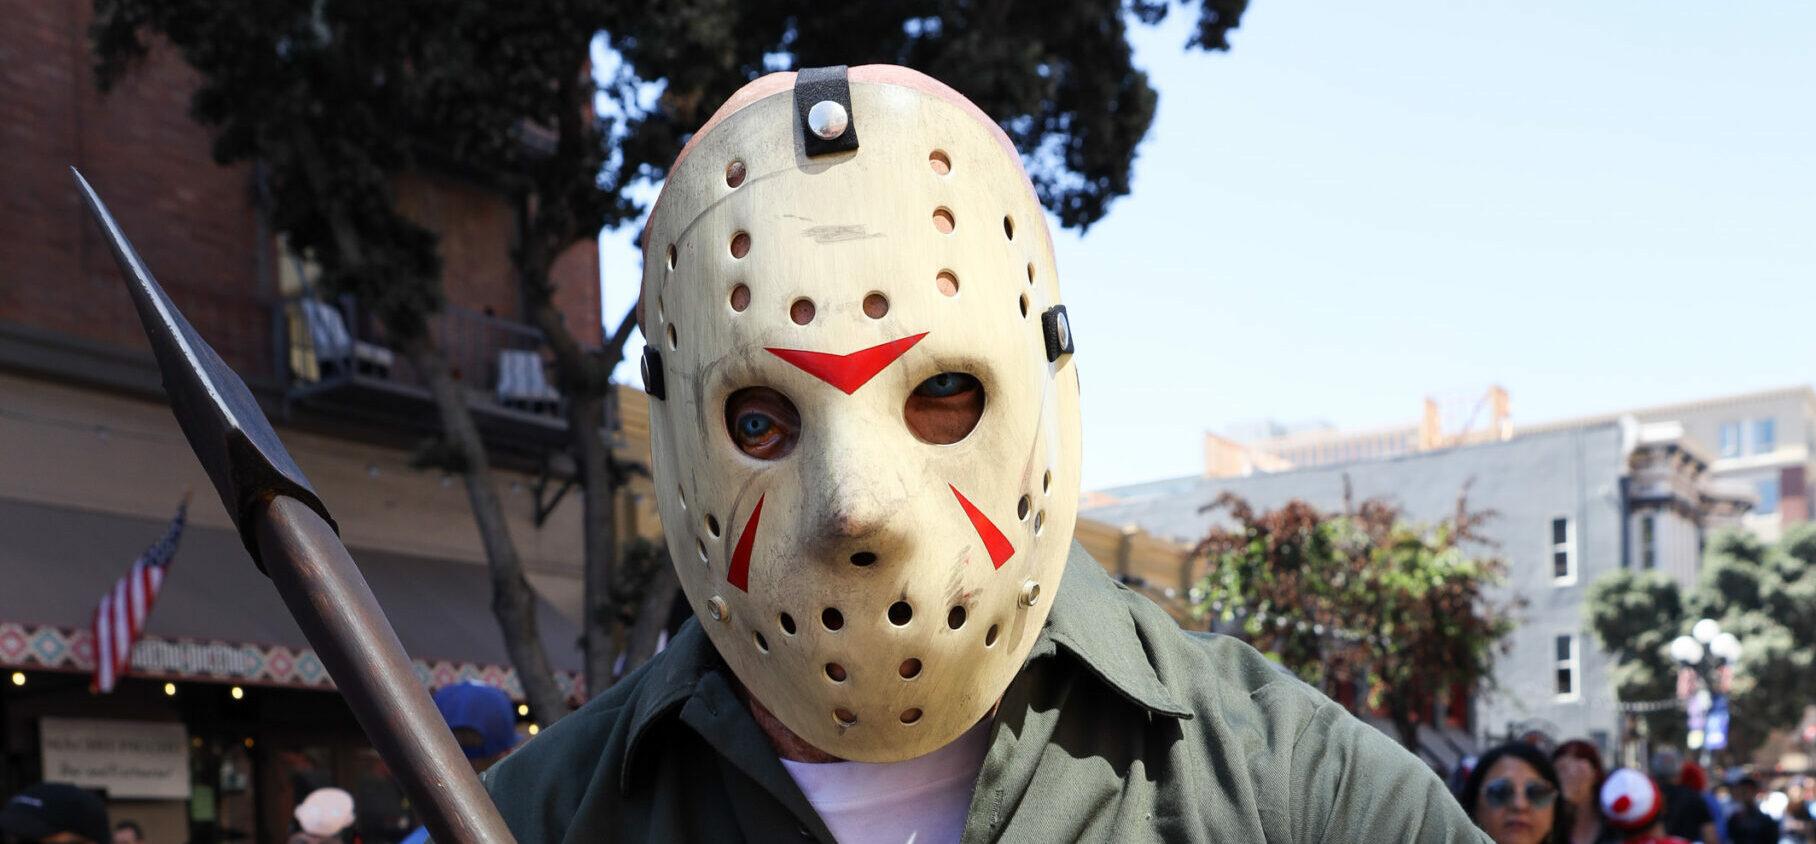 Jason Voorhees Friday the 13th Costume at Comic-Con 2019